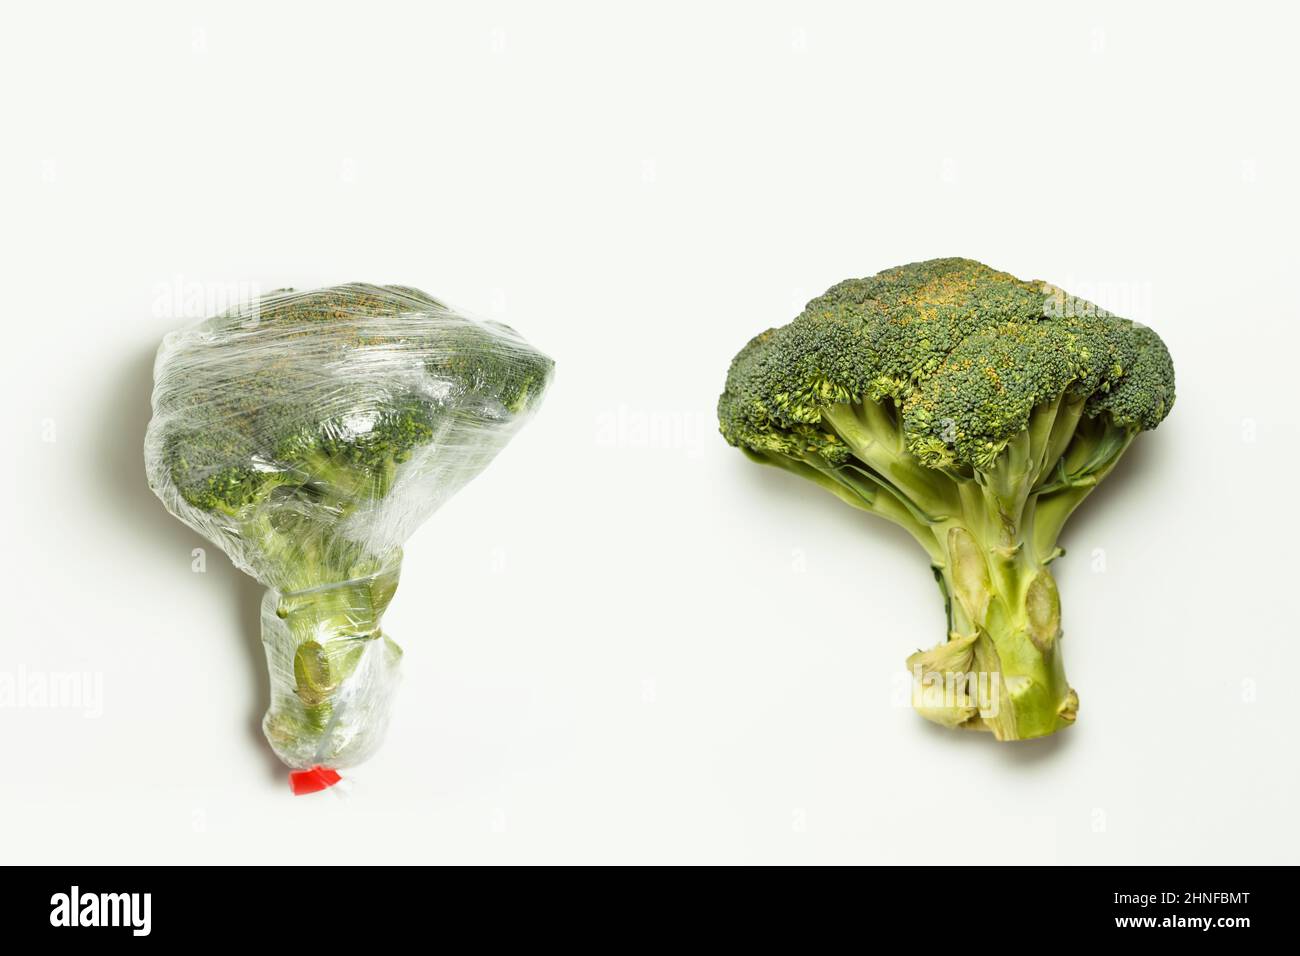 https://c8.alamy.com/comp/2HNFBMT/broccoli-packed-in-plastic-wrap-and-fresh-isolated-on-white-background-2HNFBMT.jpg